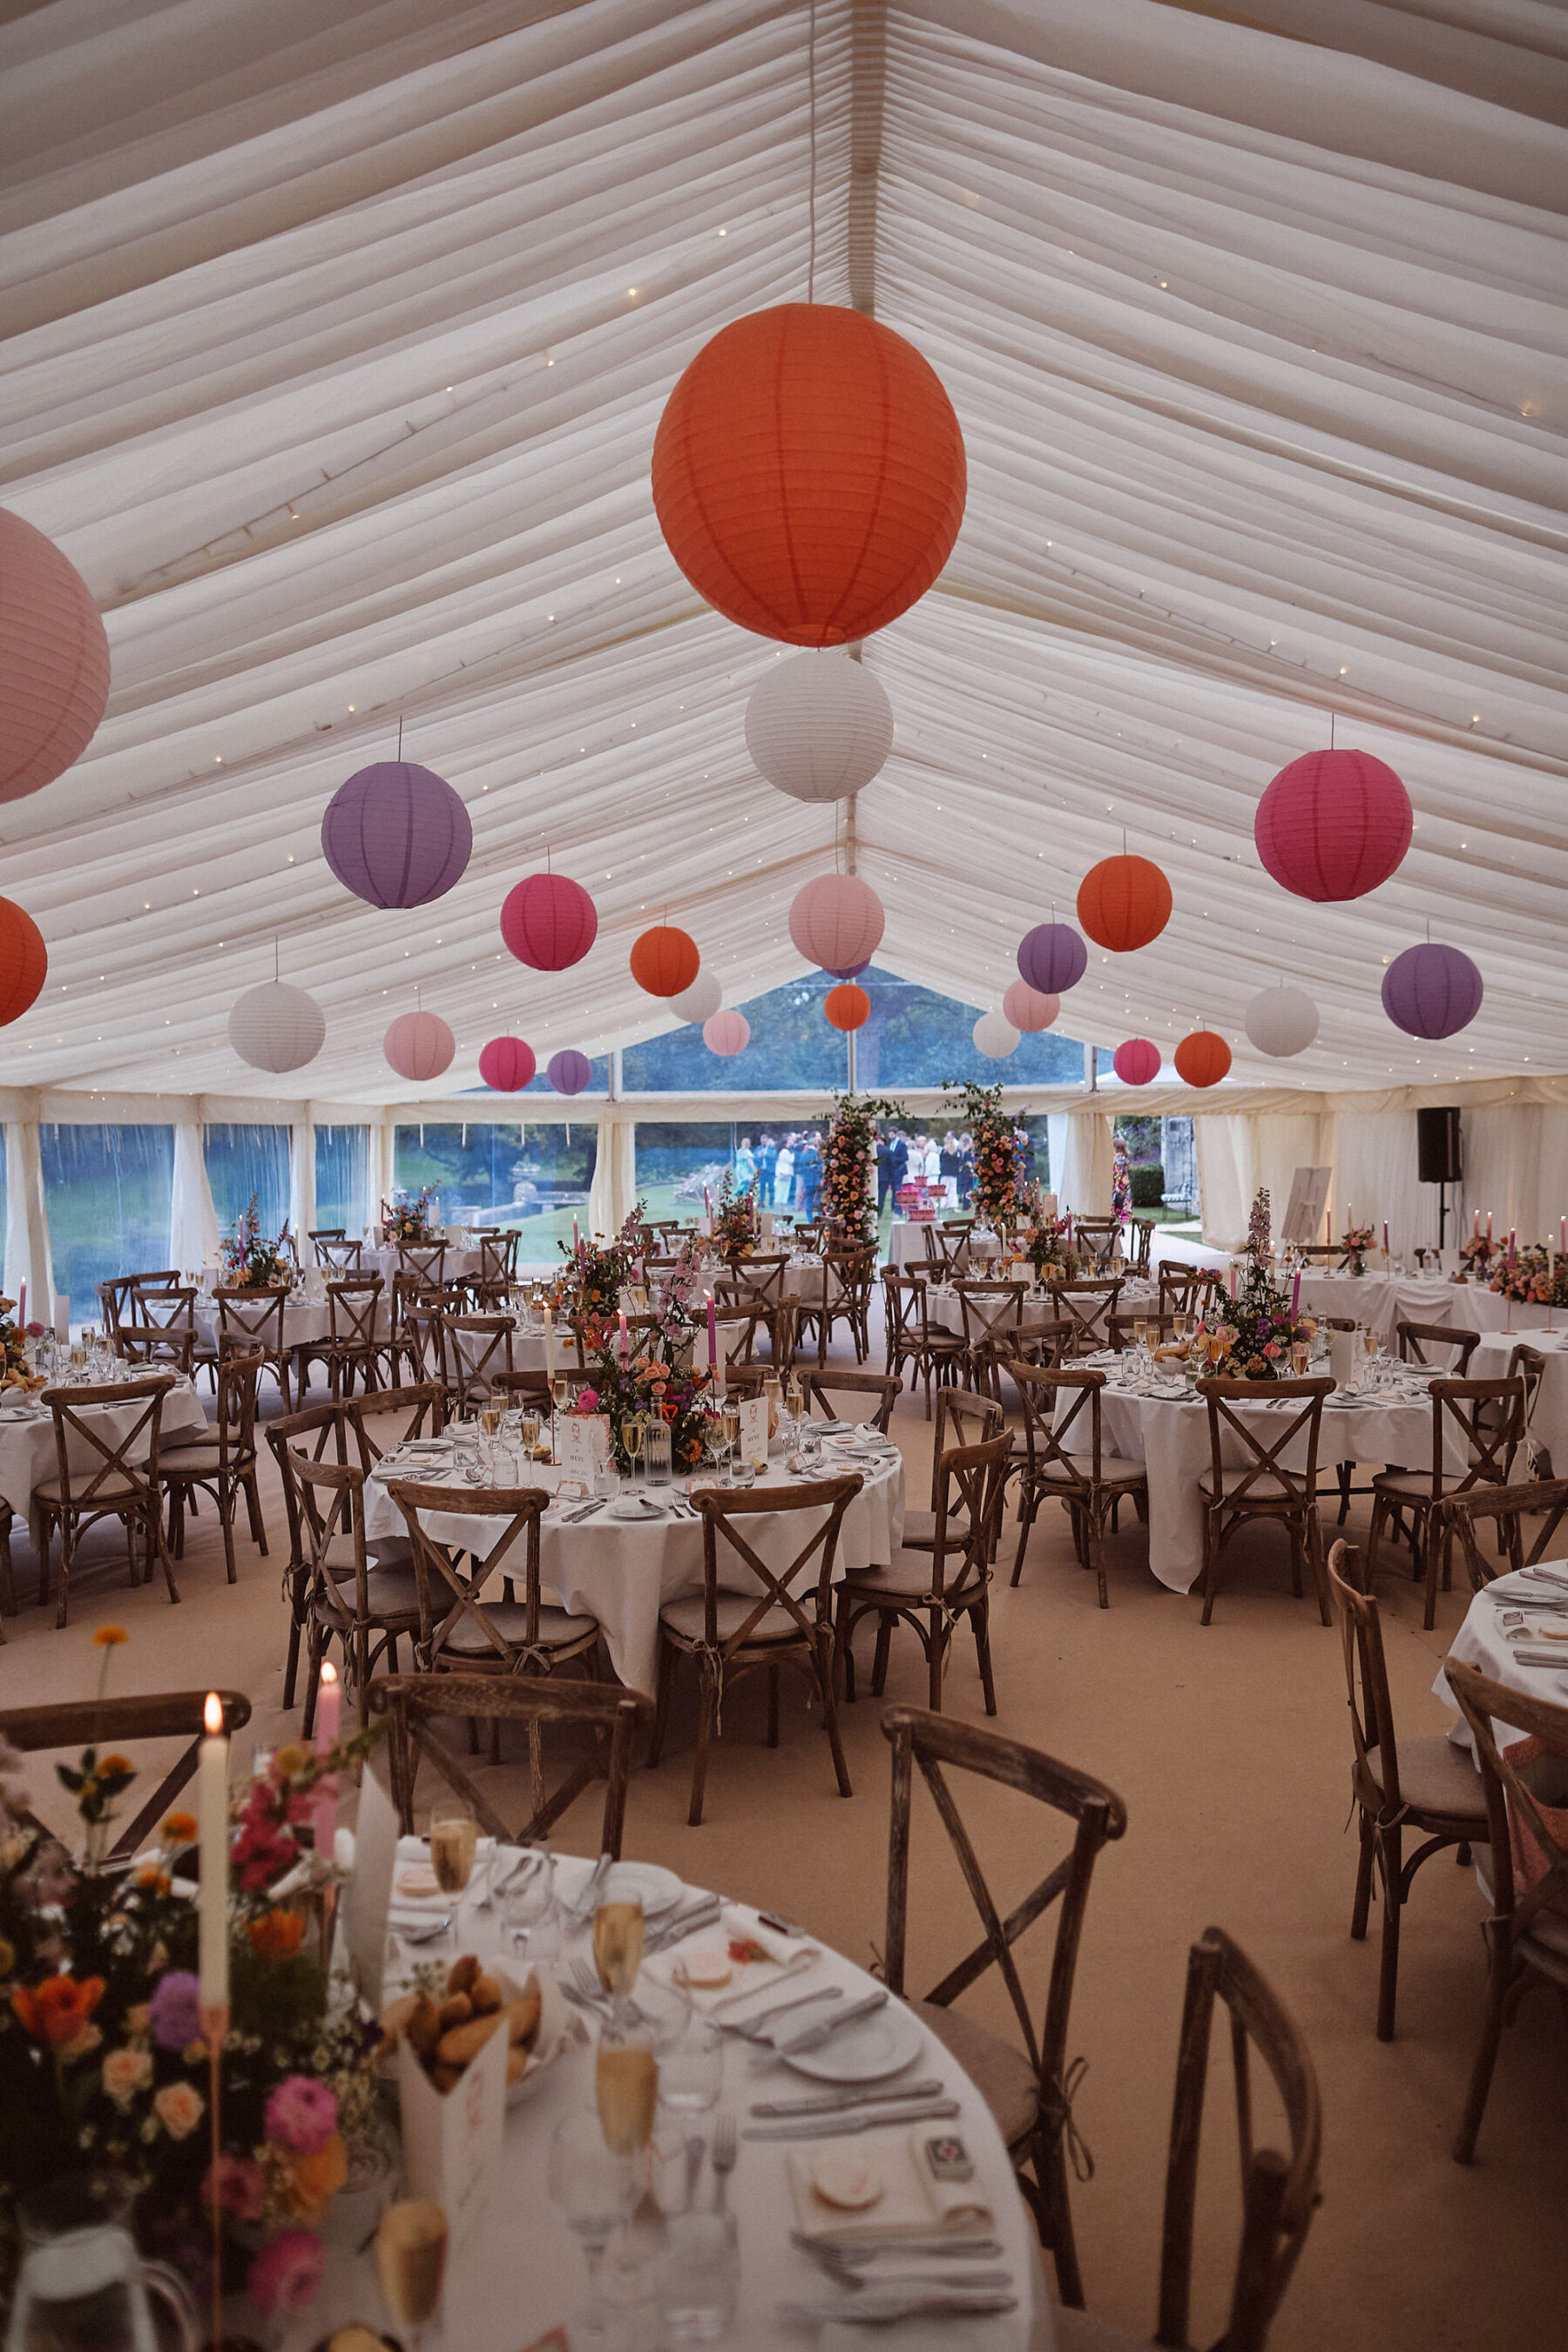 Colourful lanterns hanging within a wedding marquee. Round tables with cross back chairs and colourful floral table centrepieces.